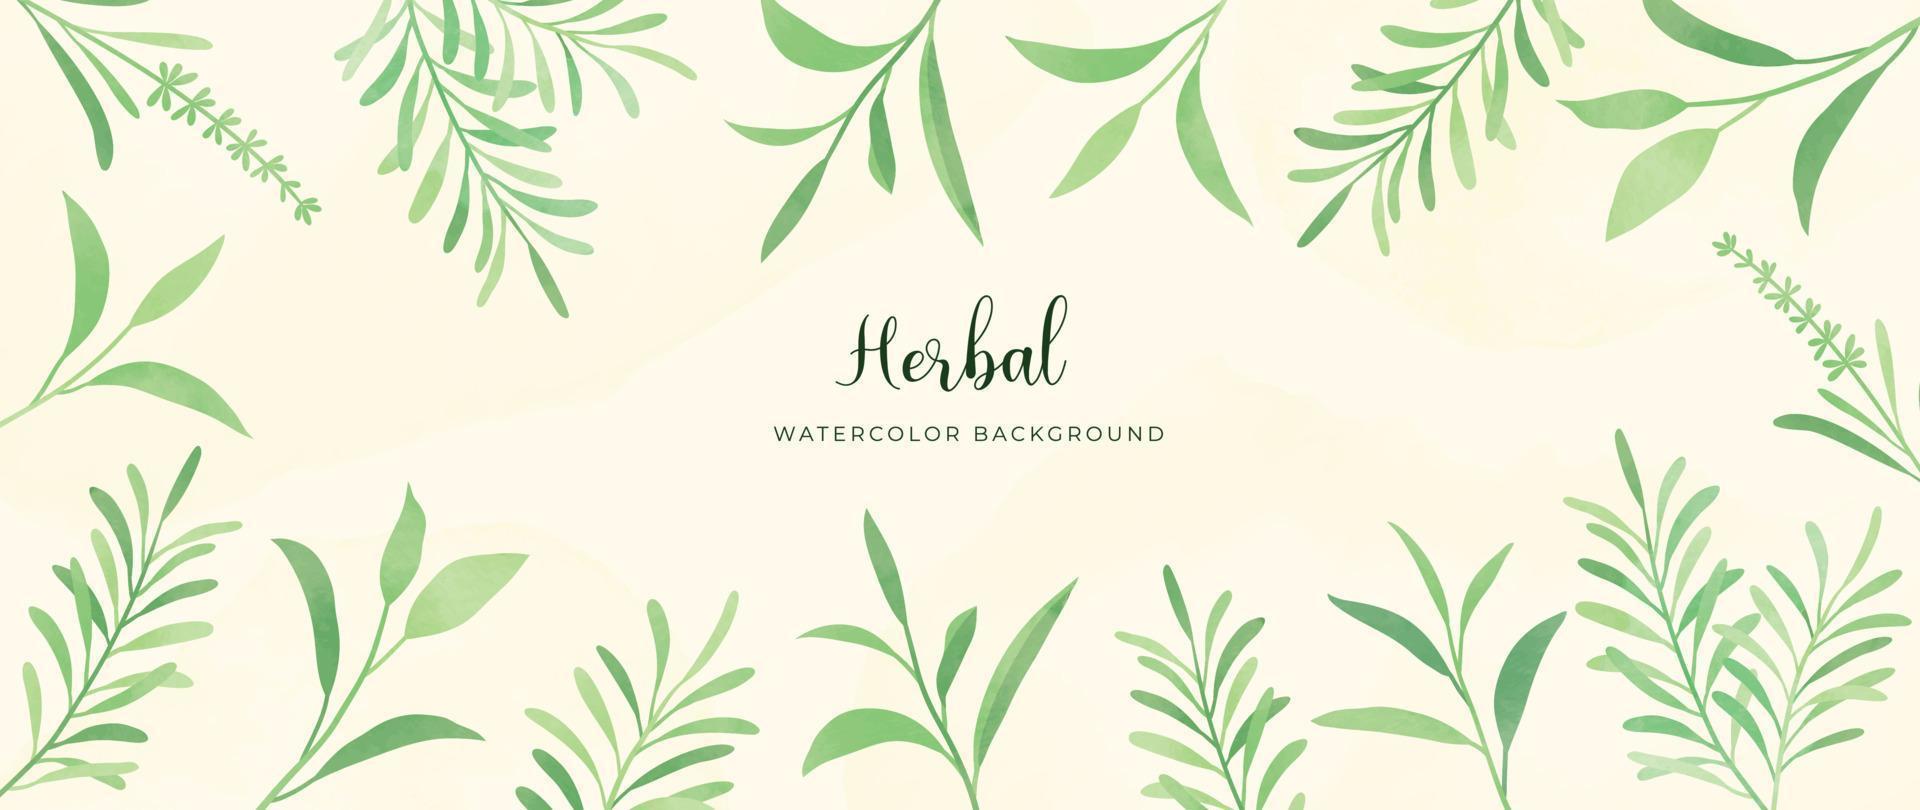 Botanical herbal watercolor background vector. Hand drawn green aromatic fresh herbal leaf branch background. Decorative garden foliage design for wallpaper, cover, advertising, healthcare product. vector